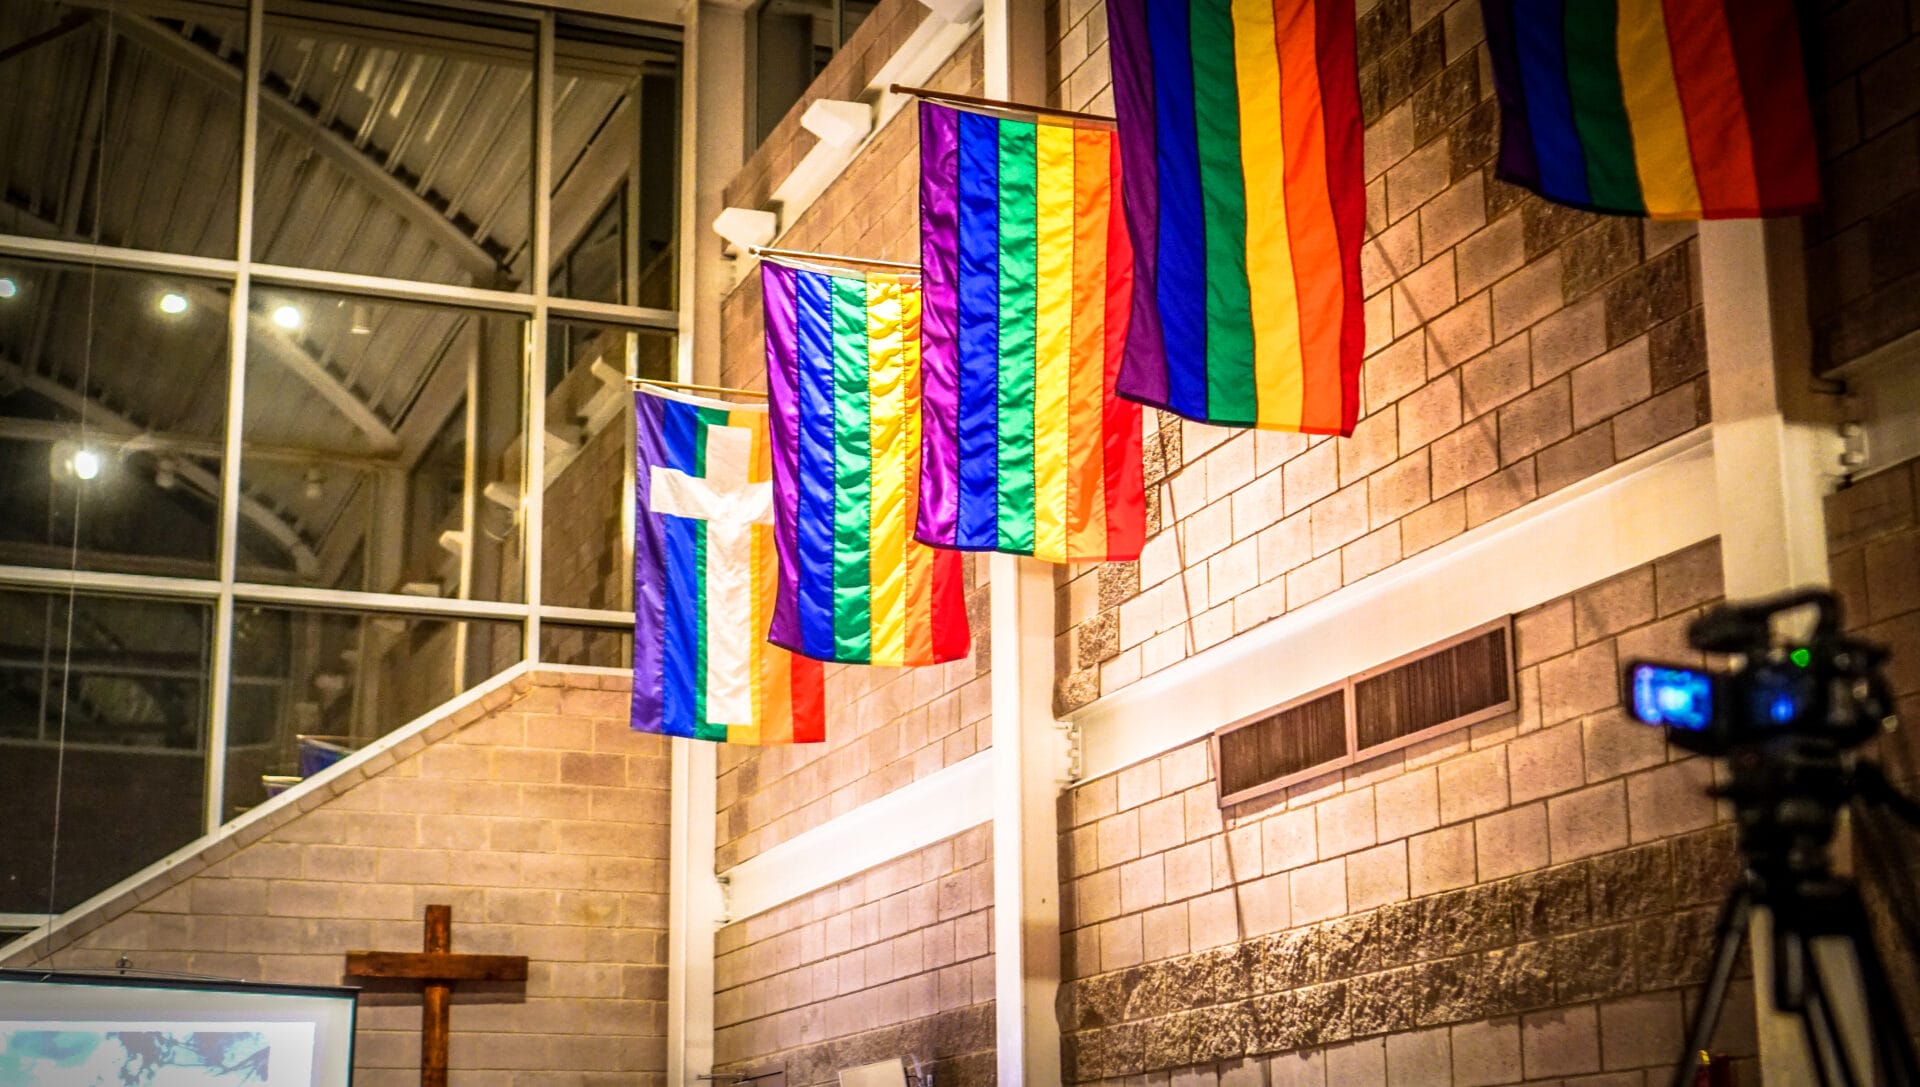  New Findings Show 60+ Anti-LGBTQ+ Incidents Targeting US Religious Institutions 